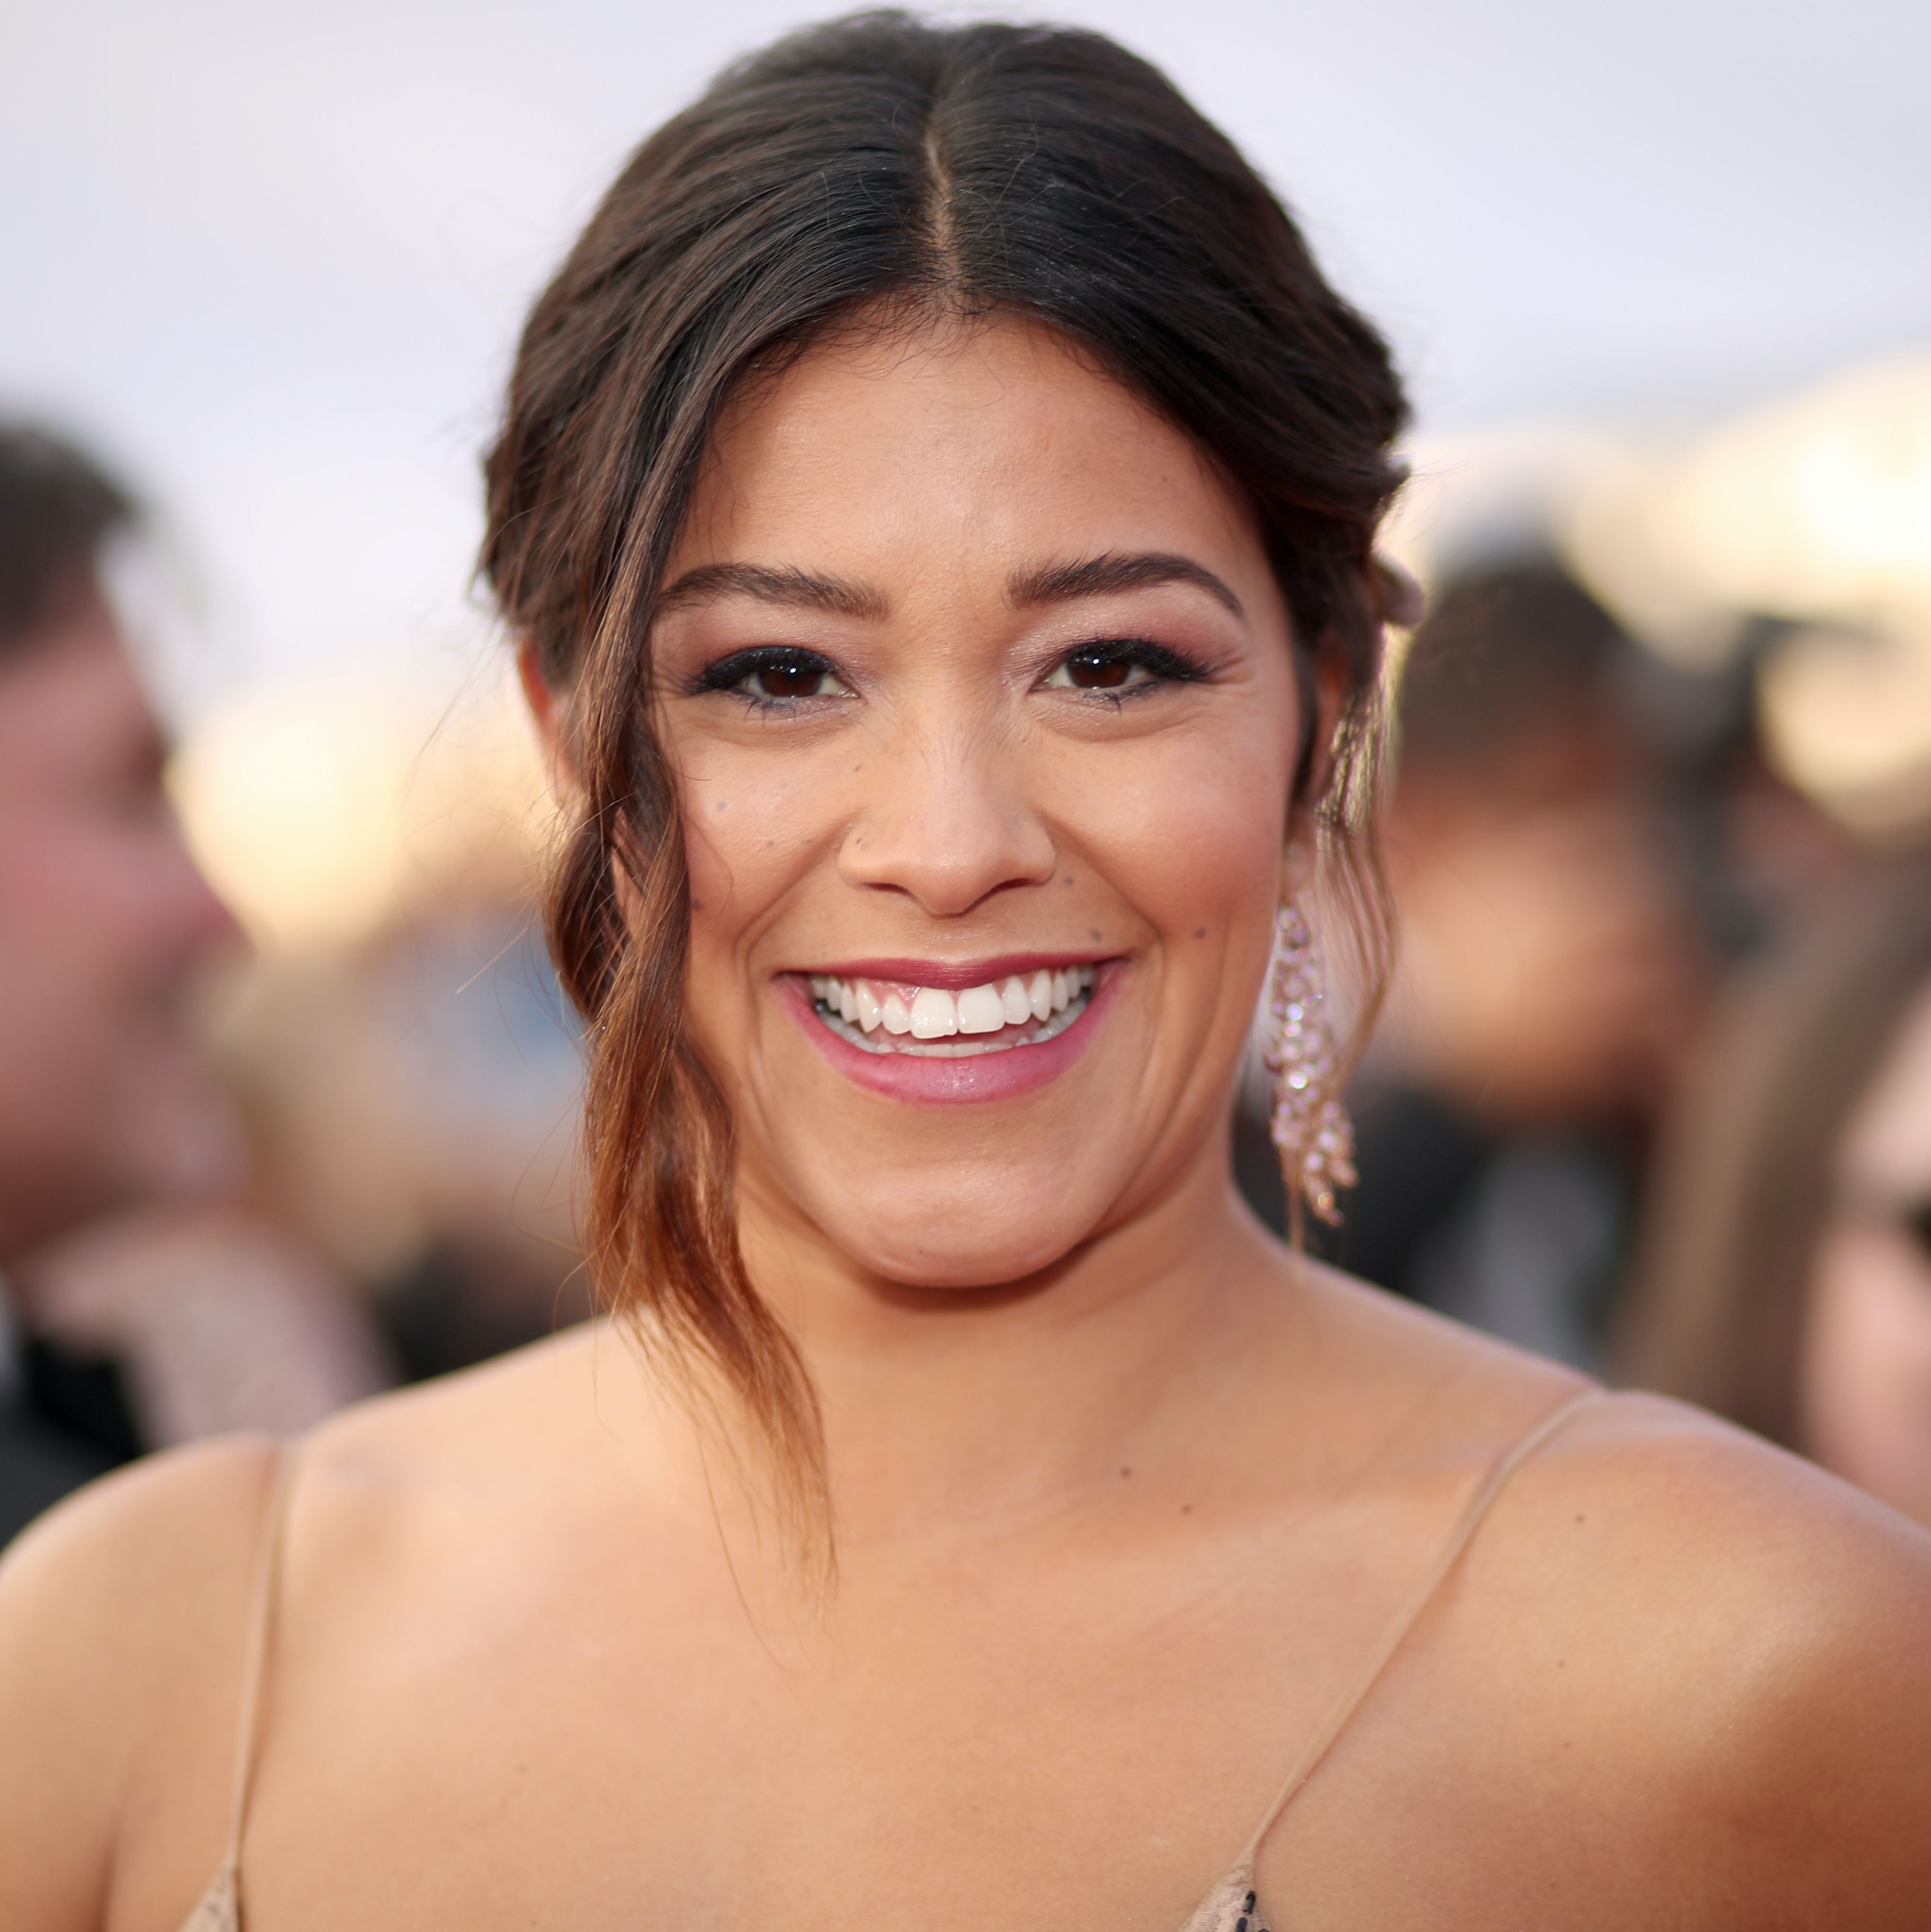 How Many Kids Does Gina Rodriguez Have?